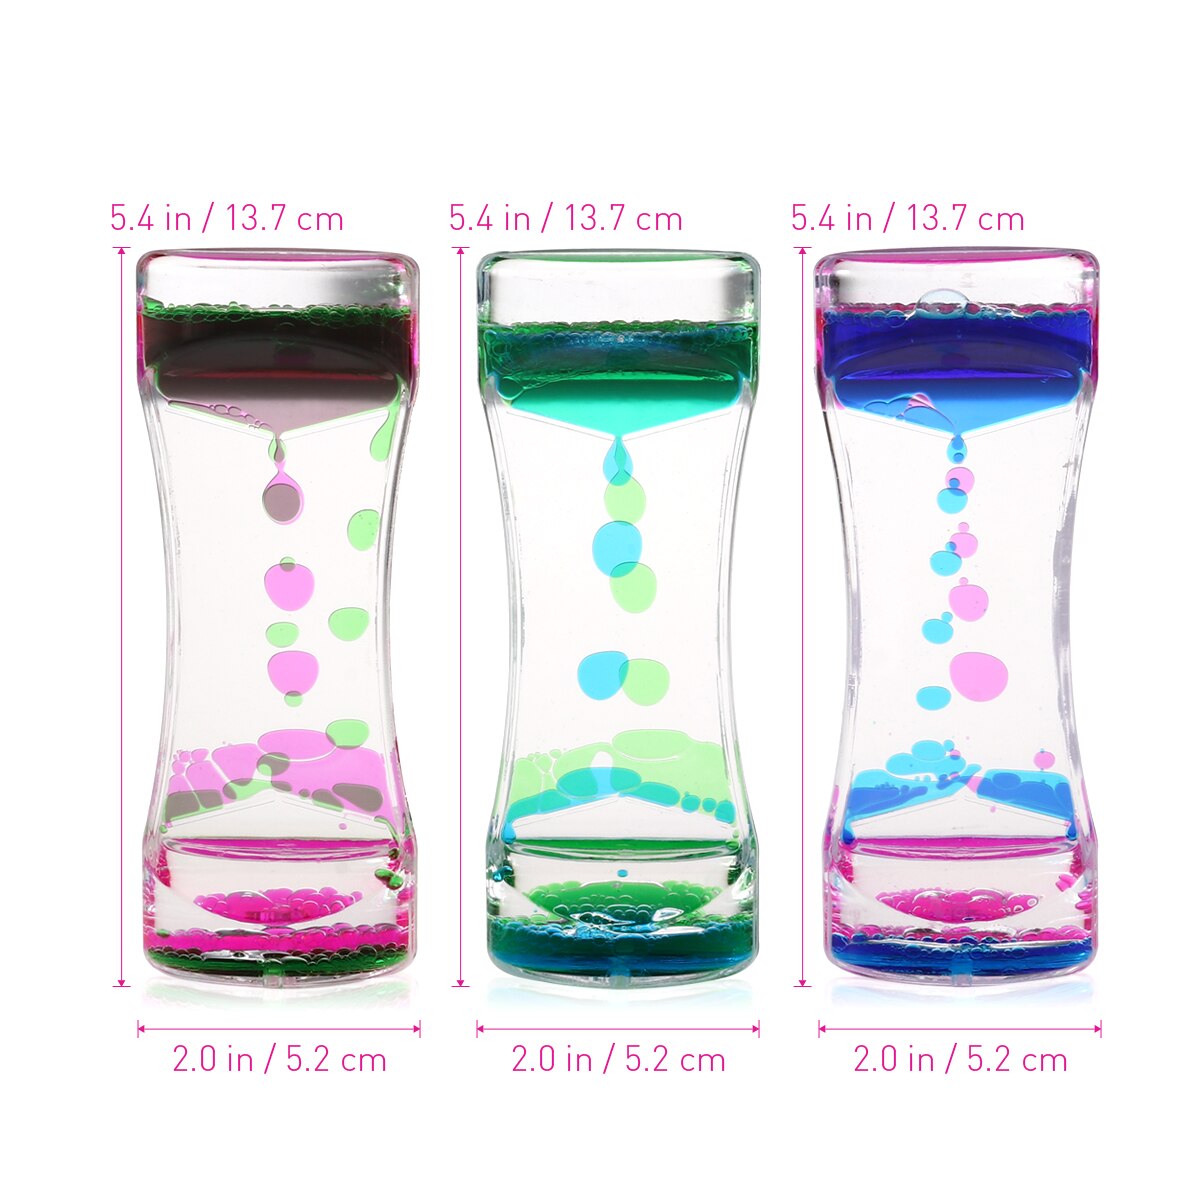 Oil Hourglass Minute Timers (3pcs)